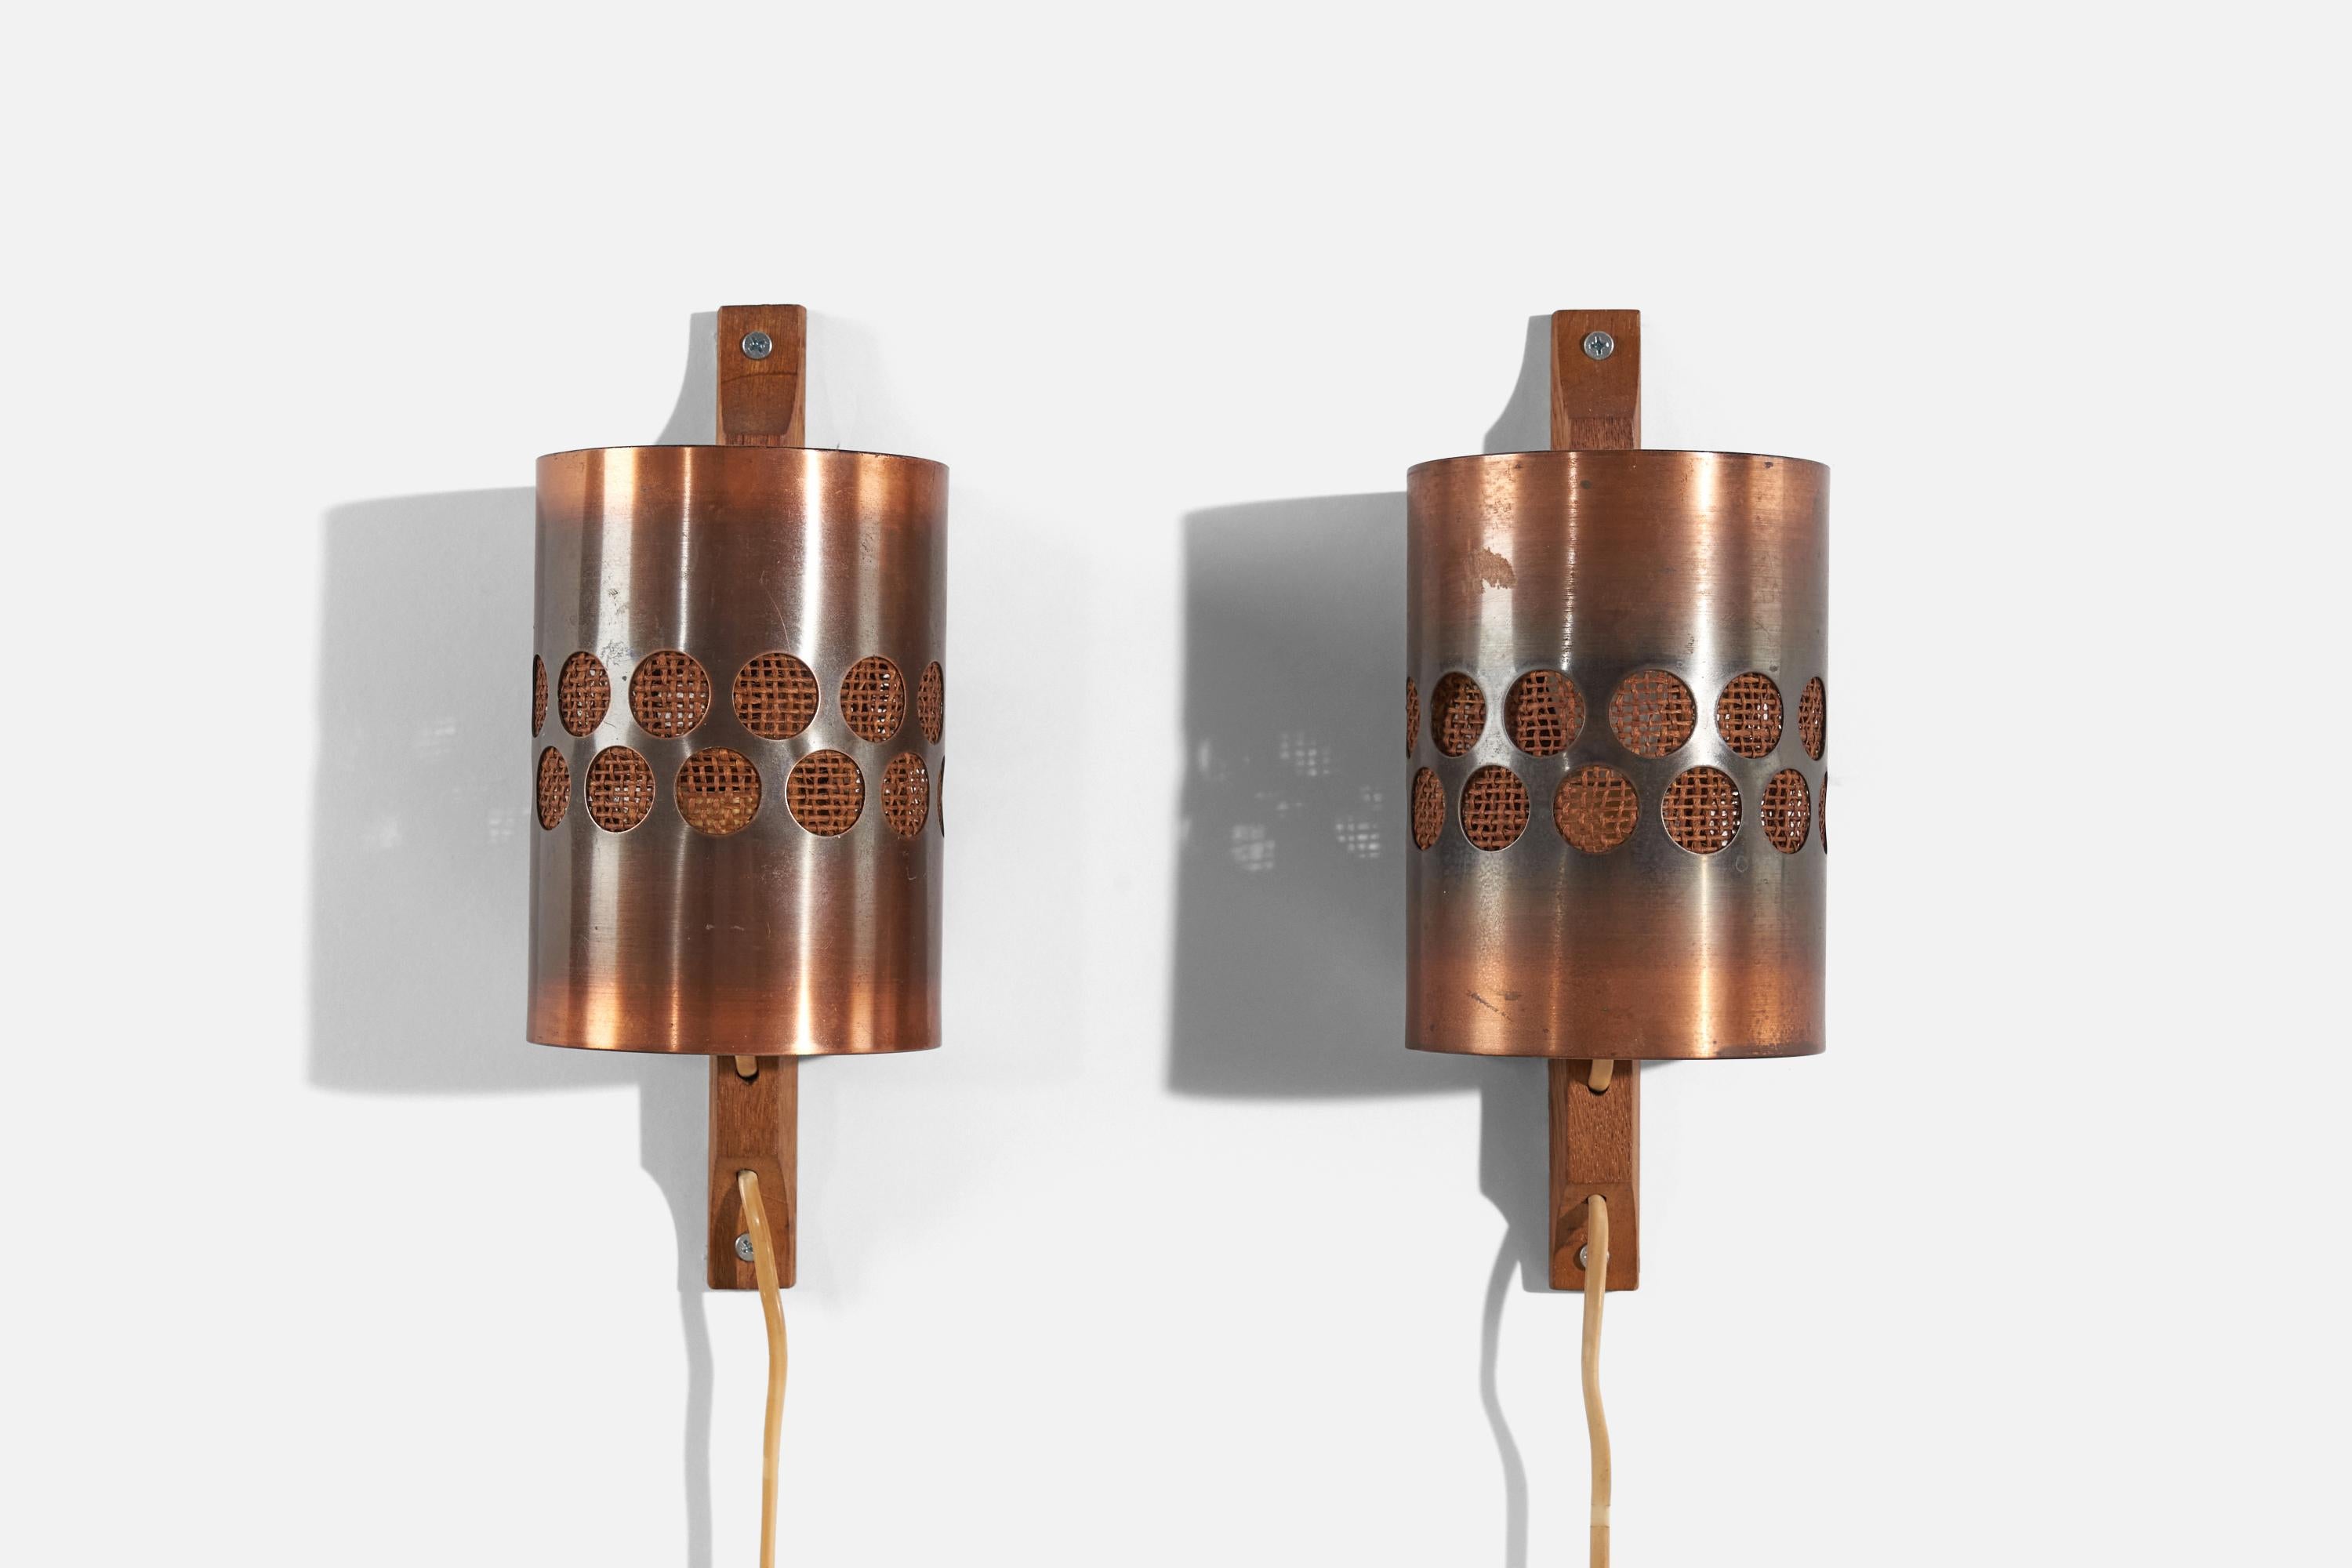 A pair of oak, copper and burlap wall lights, designed and produced by Nils H. Ledung, Sweden, 1960s.

Dimensions of the back plate (inches) : 2.625 x 1 x 1.125 (H x W x D).